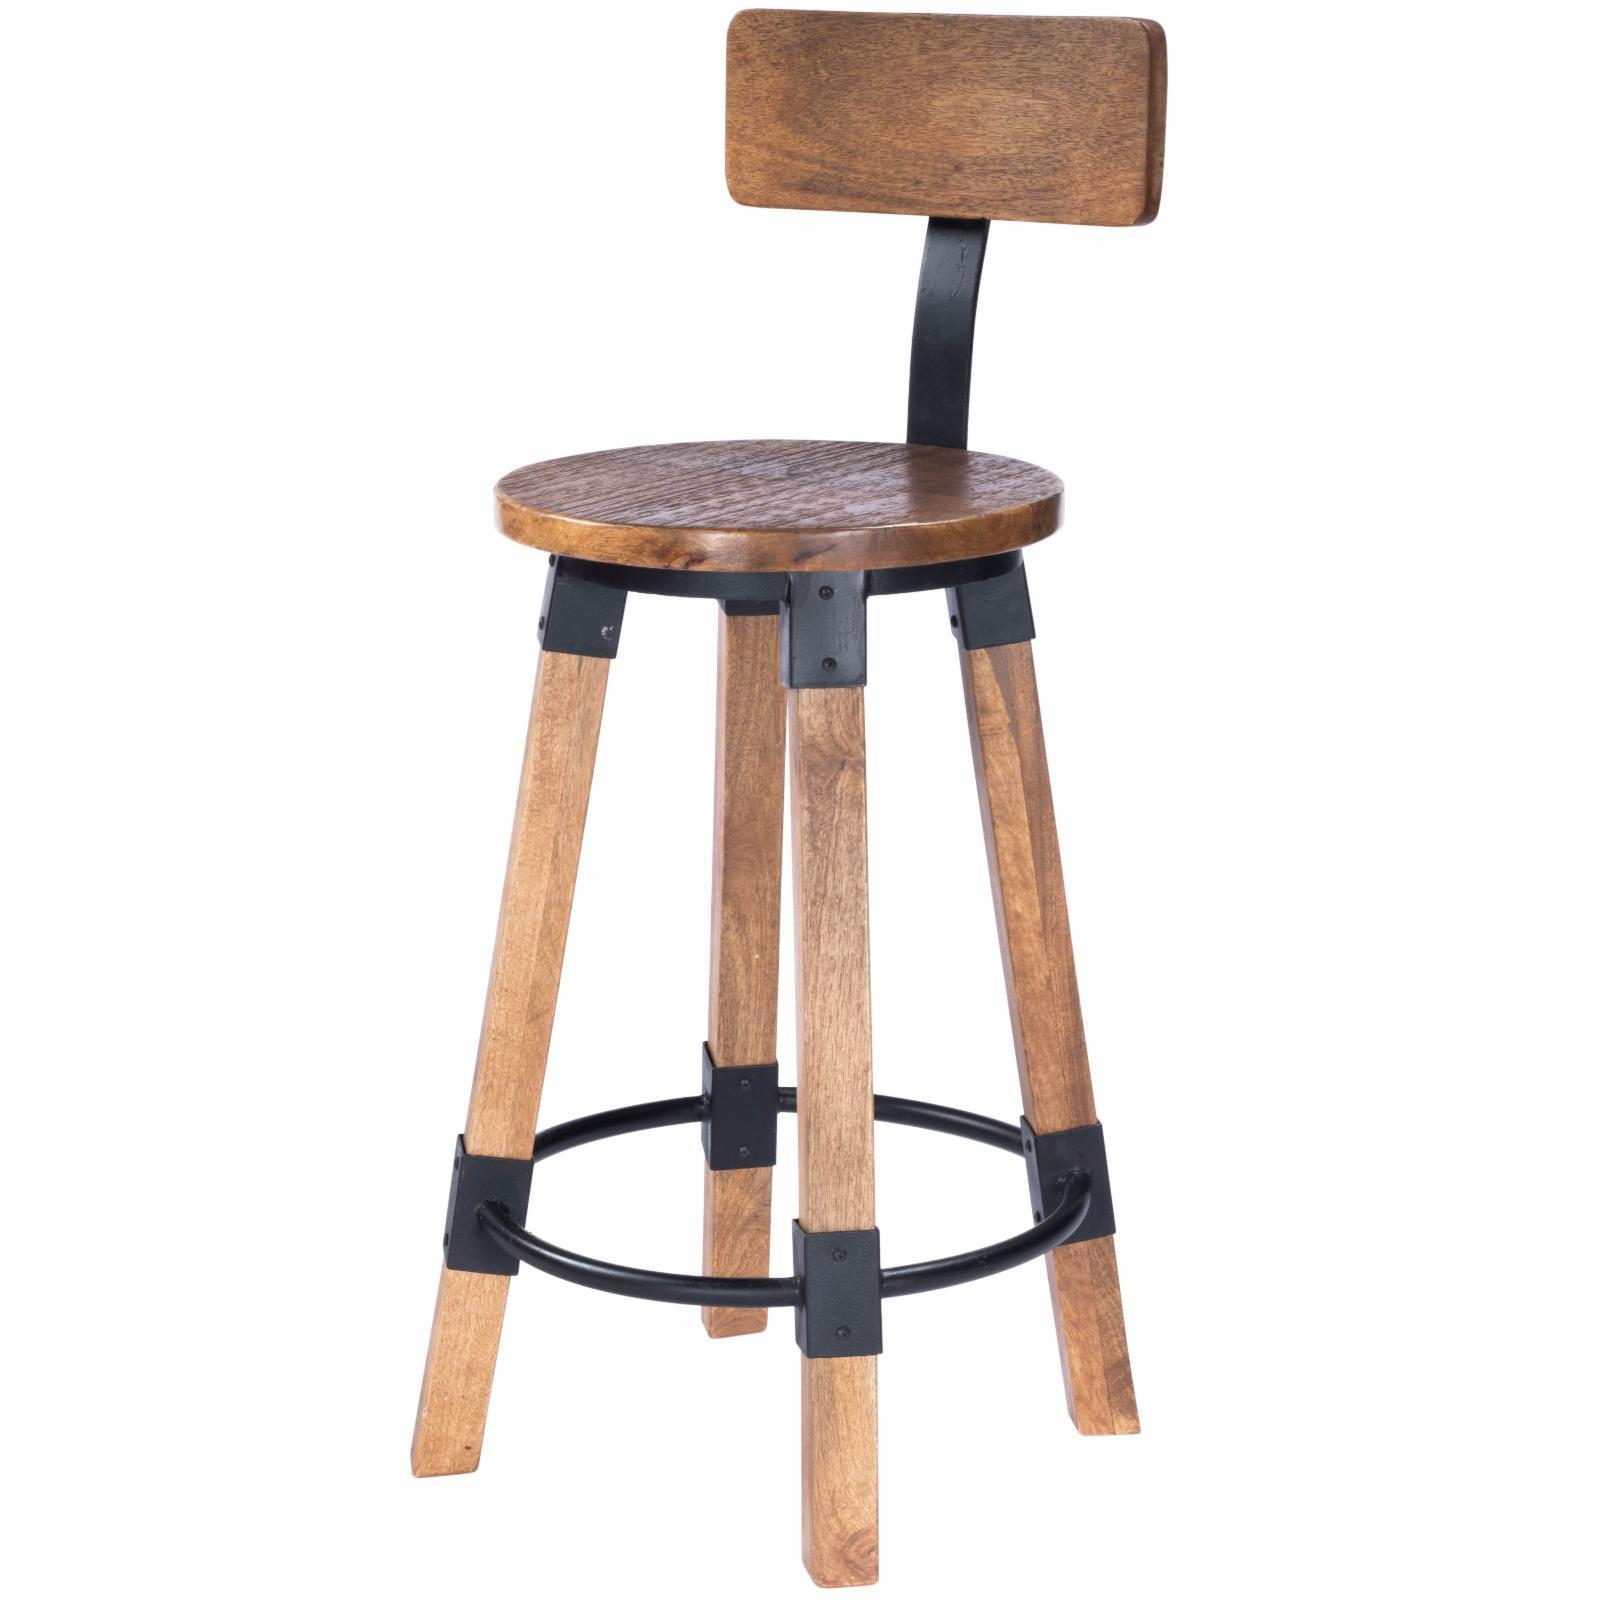 Masterson Industrial Chic Wood & Metal Counter Stool in Natural Brown